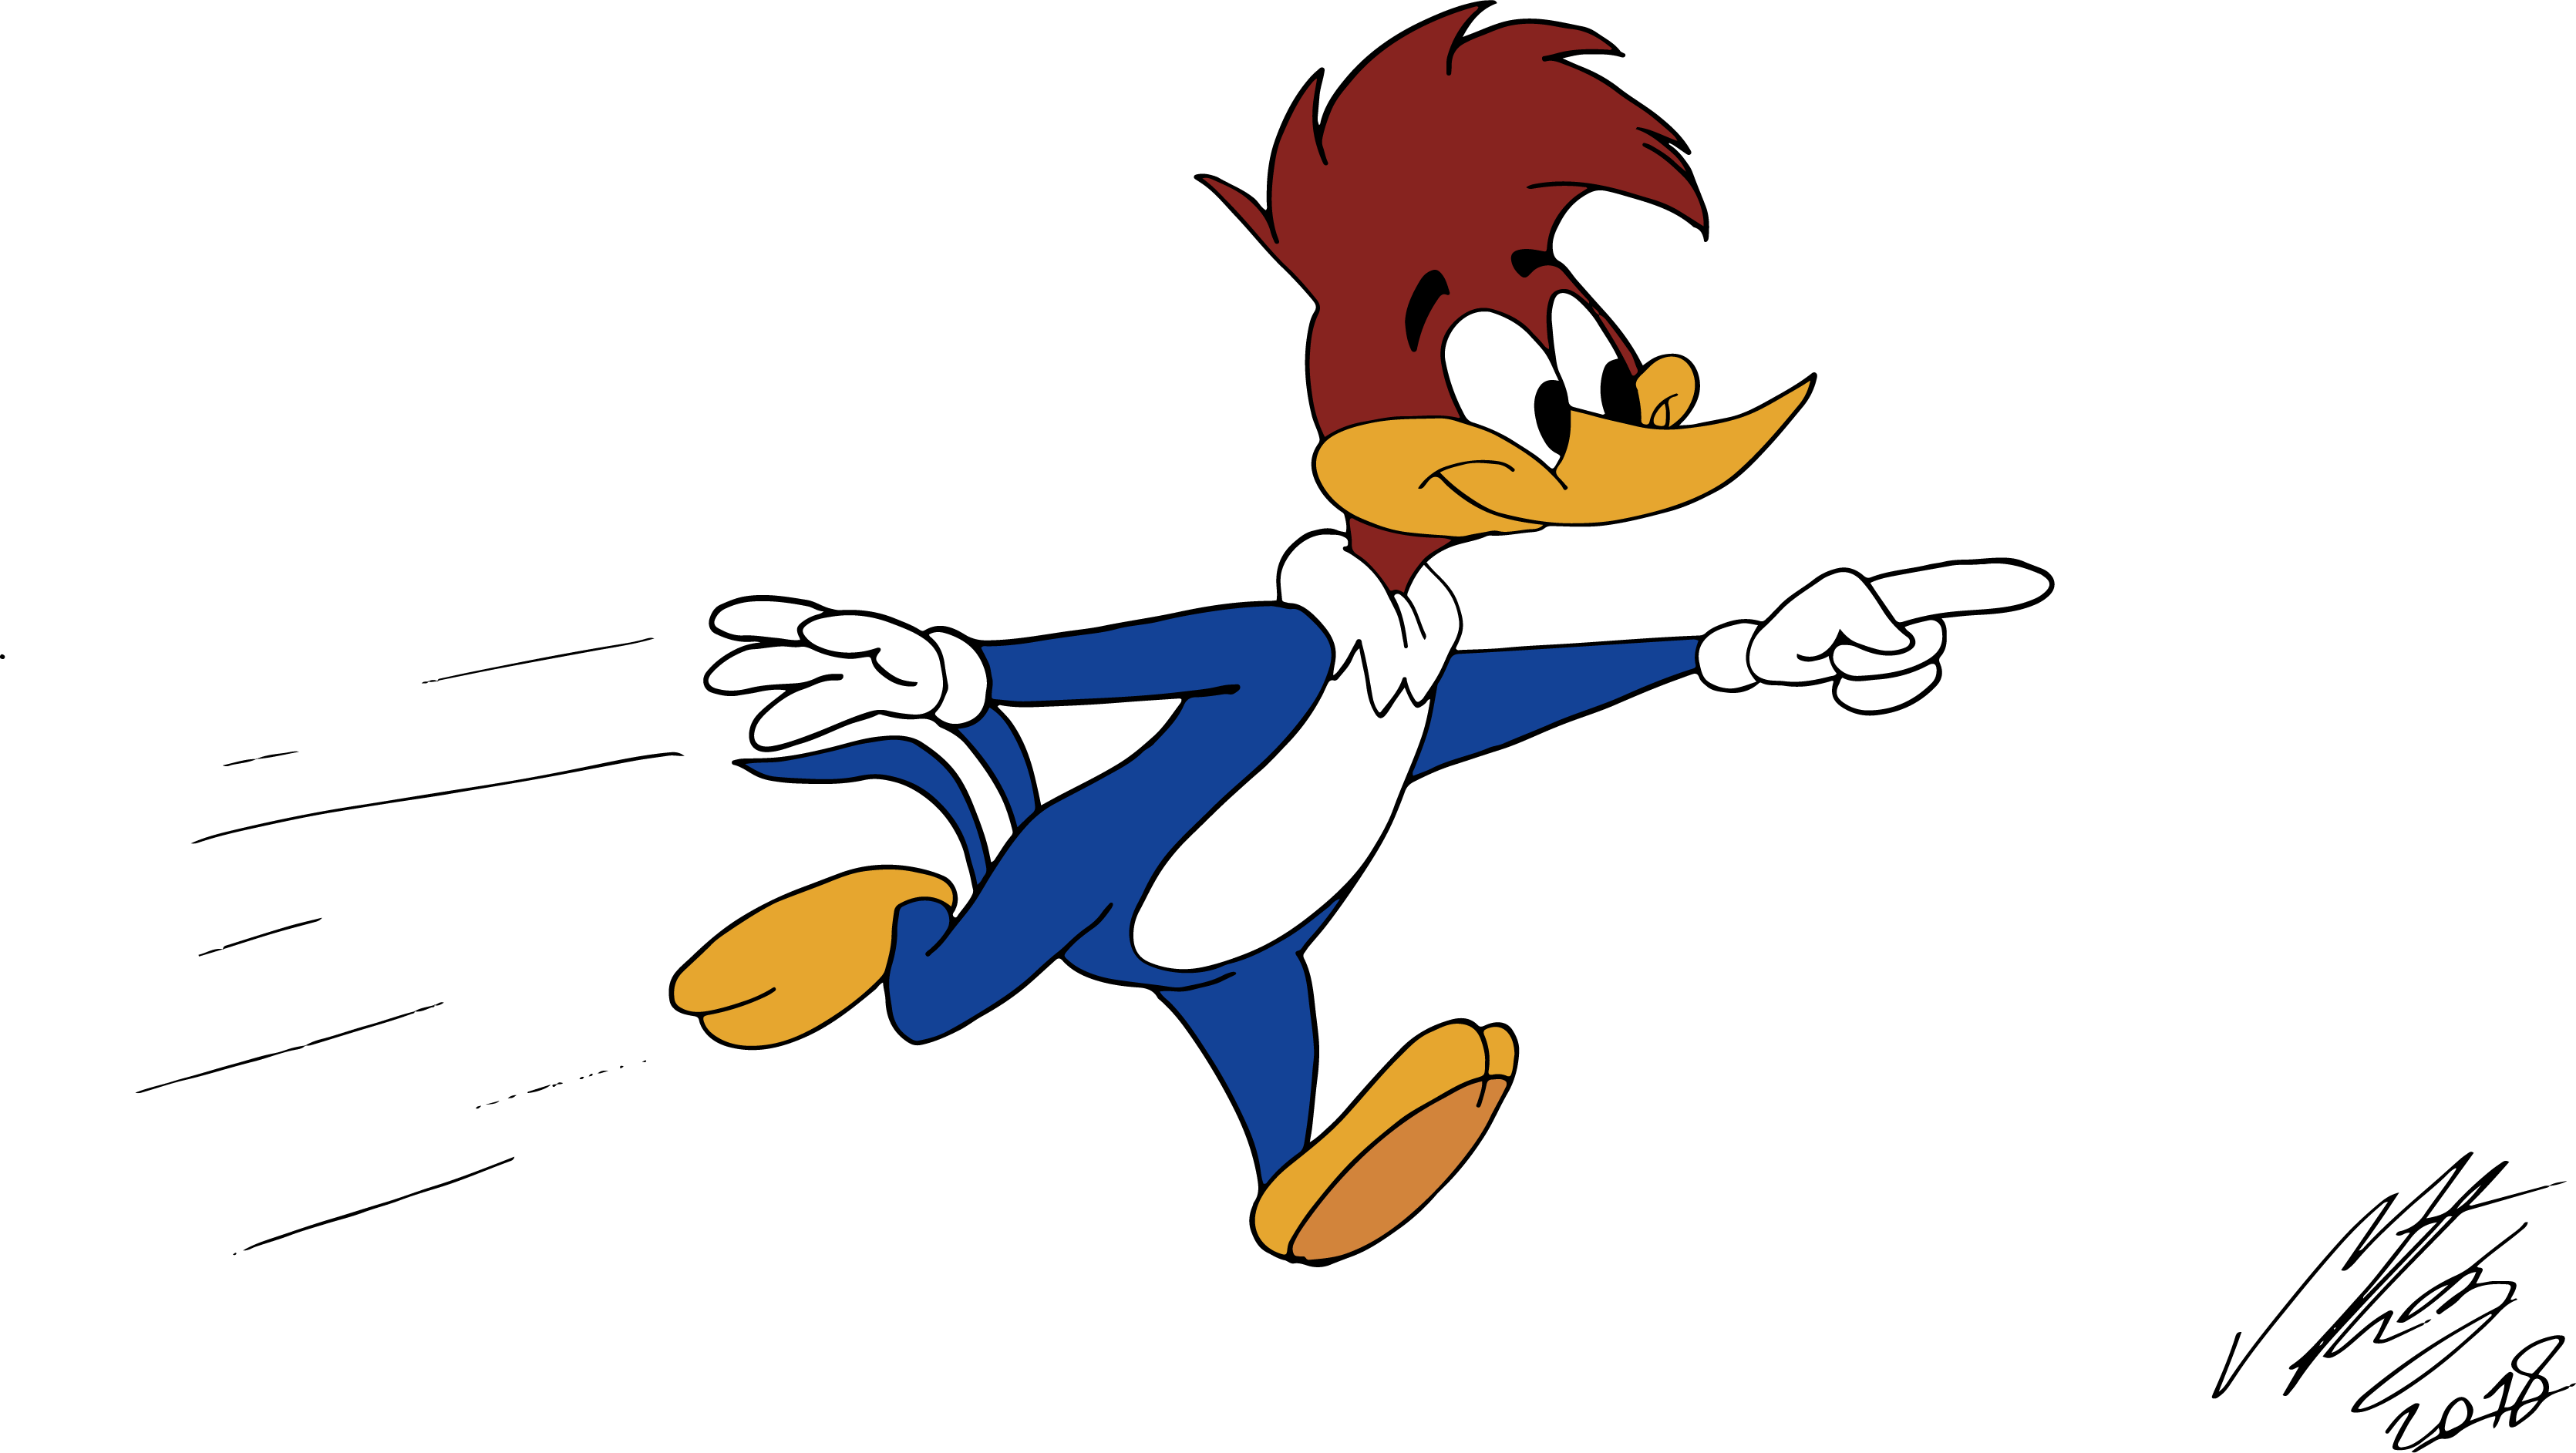 Woody Woodpecker colored by cheril59 on DeviantArt